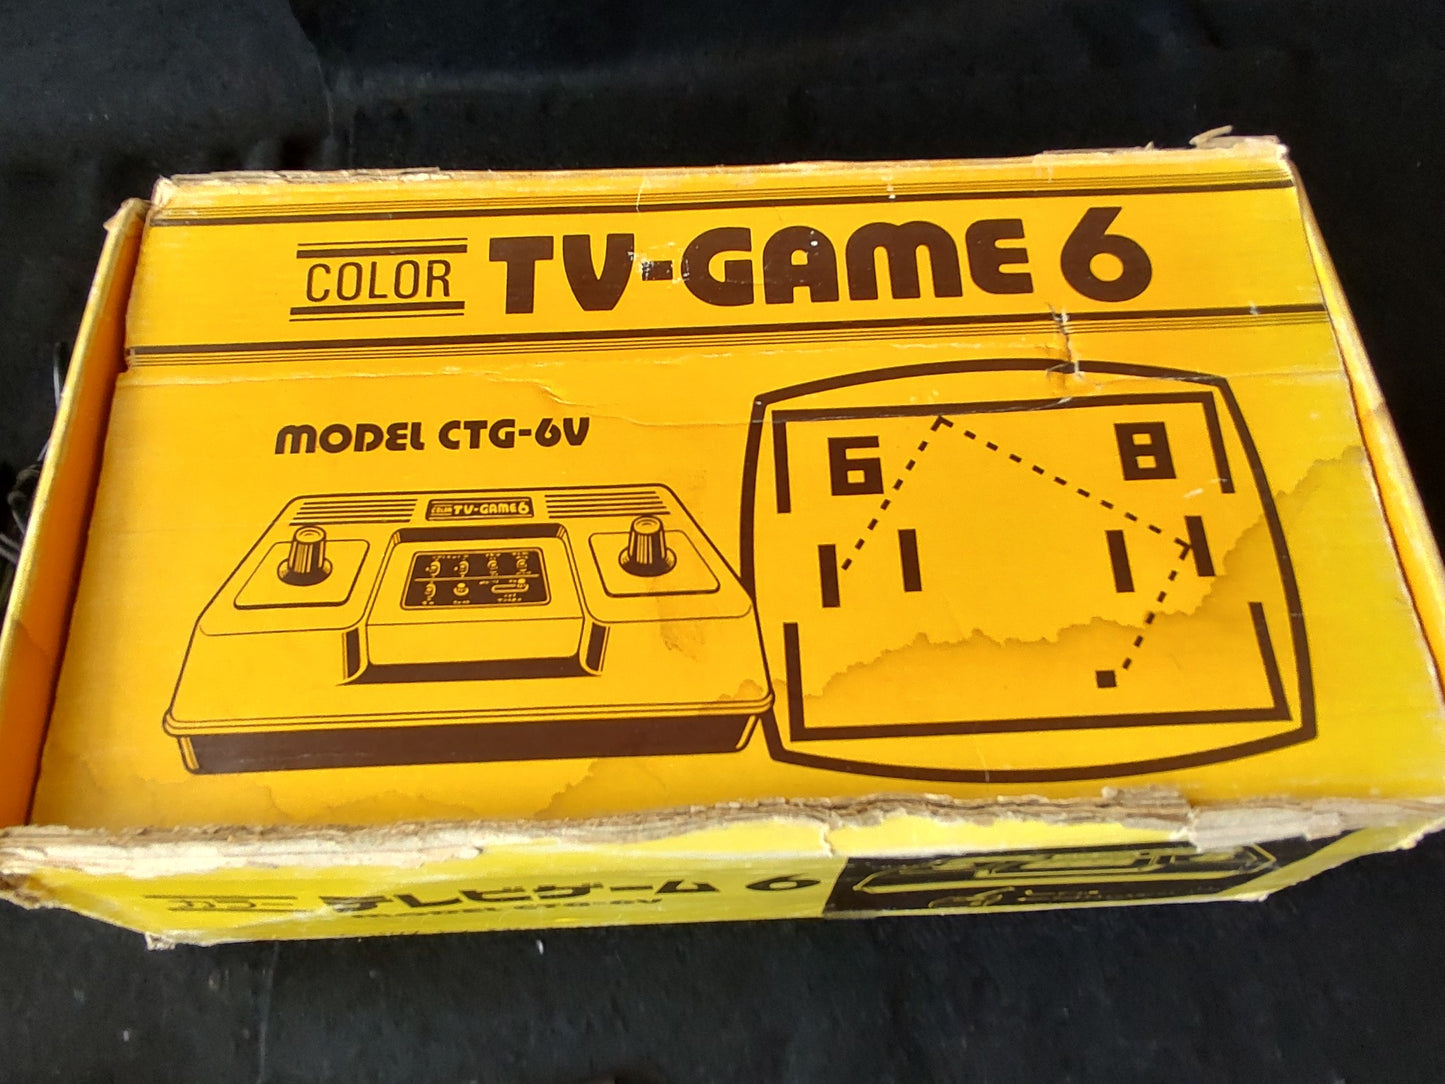 Nintendo TV GAME 6 (CTG-6V) Console,RF switch and Box set, working-f0726-